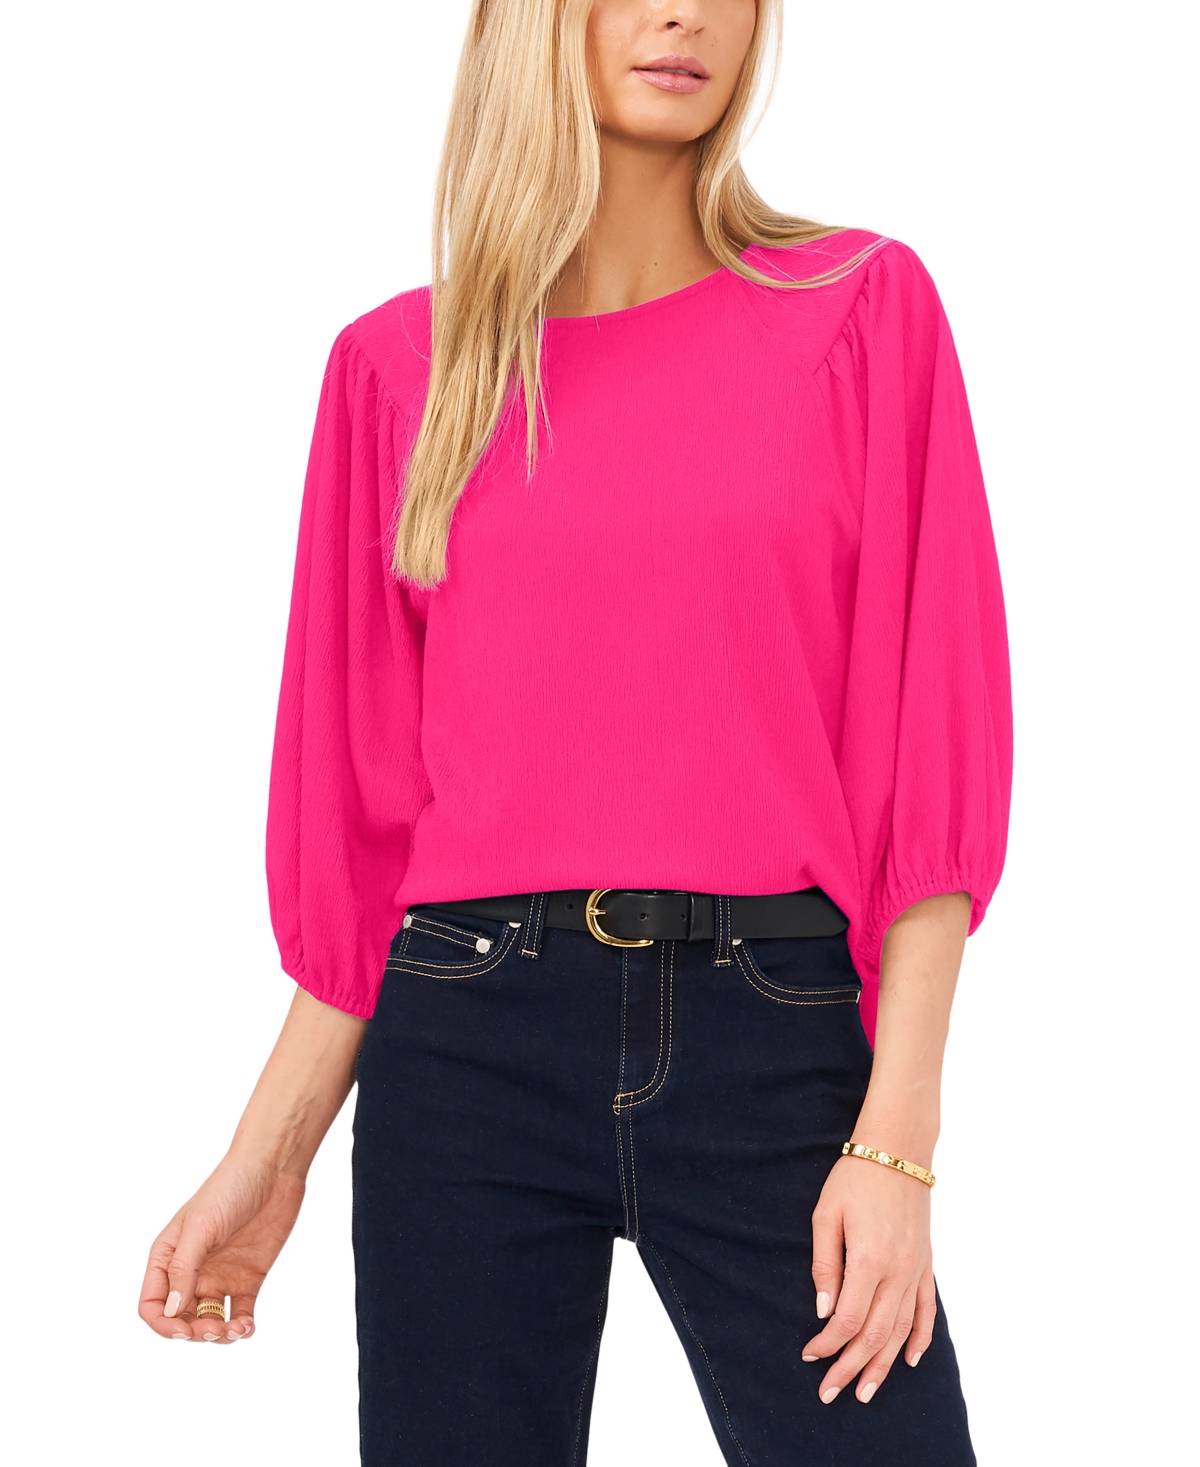 VINCE CAMUTO WOMEN'S PUFF 3/4-SLEEVE KNIT TOP